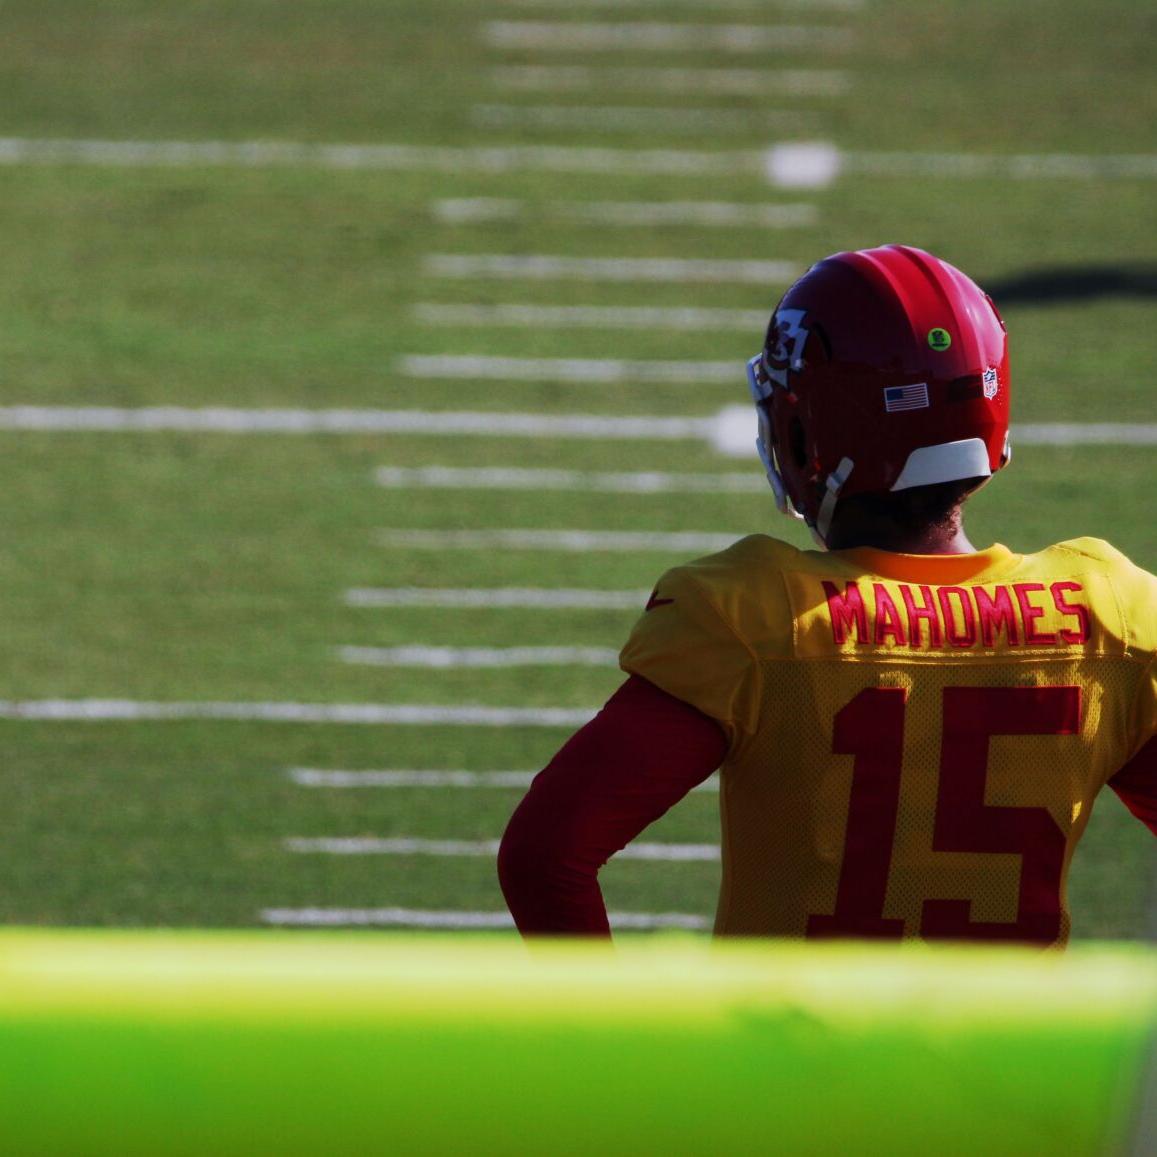 NFL notes: Chiefs' Patrick Mahomes returns to practice